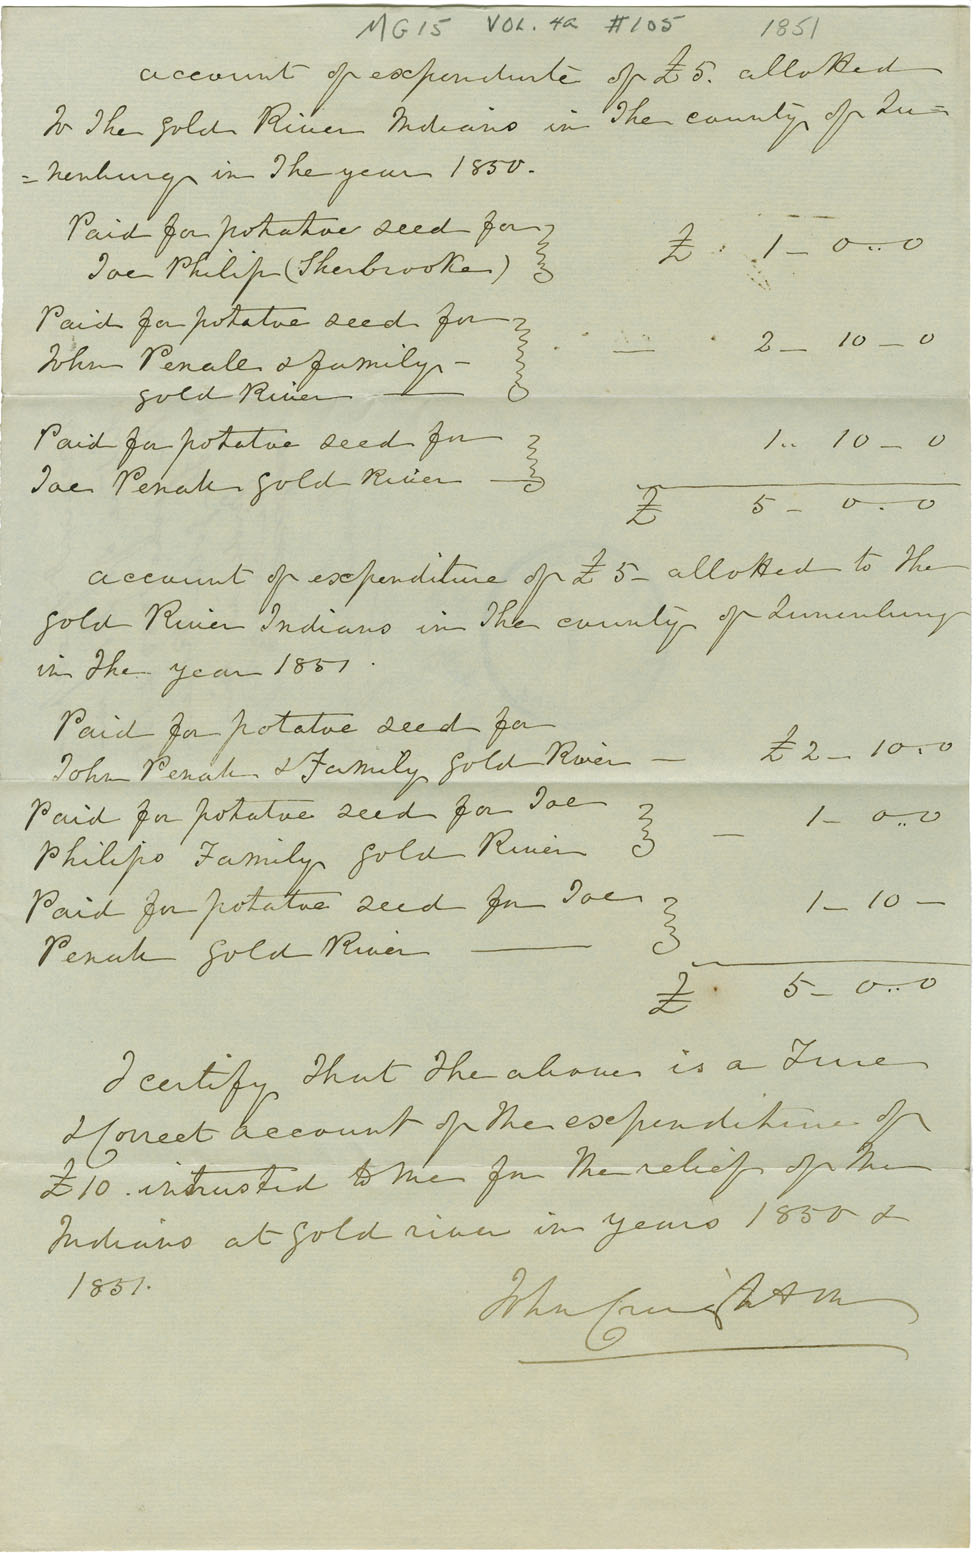 Account of expenditure of £5 allotted to Mi'kmaq at Gold River, near Lunenburg (particularly seed potatoes).